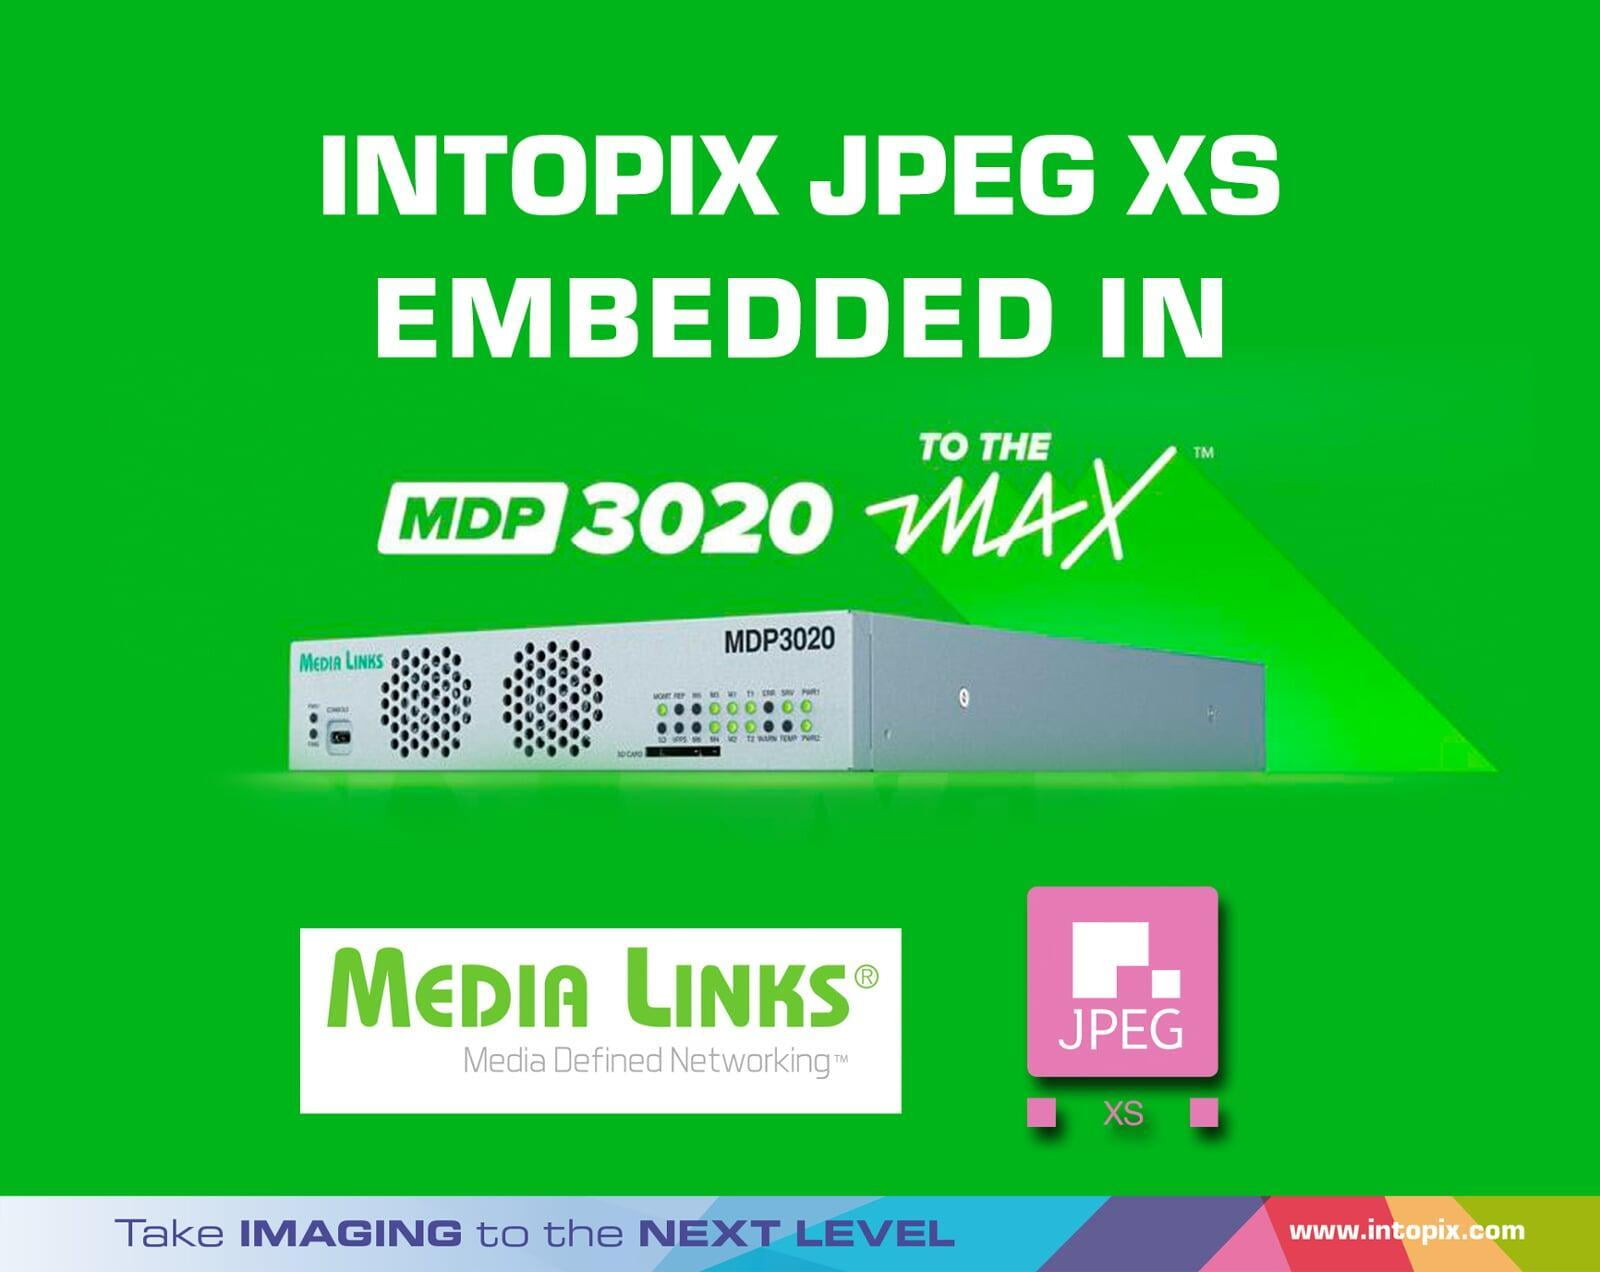 JPEG XS embedded in the MDP3020 MAX to meet the insatiable demand for live content